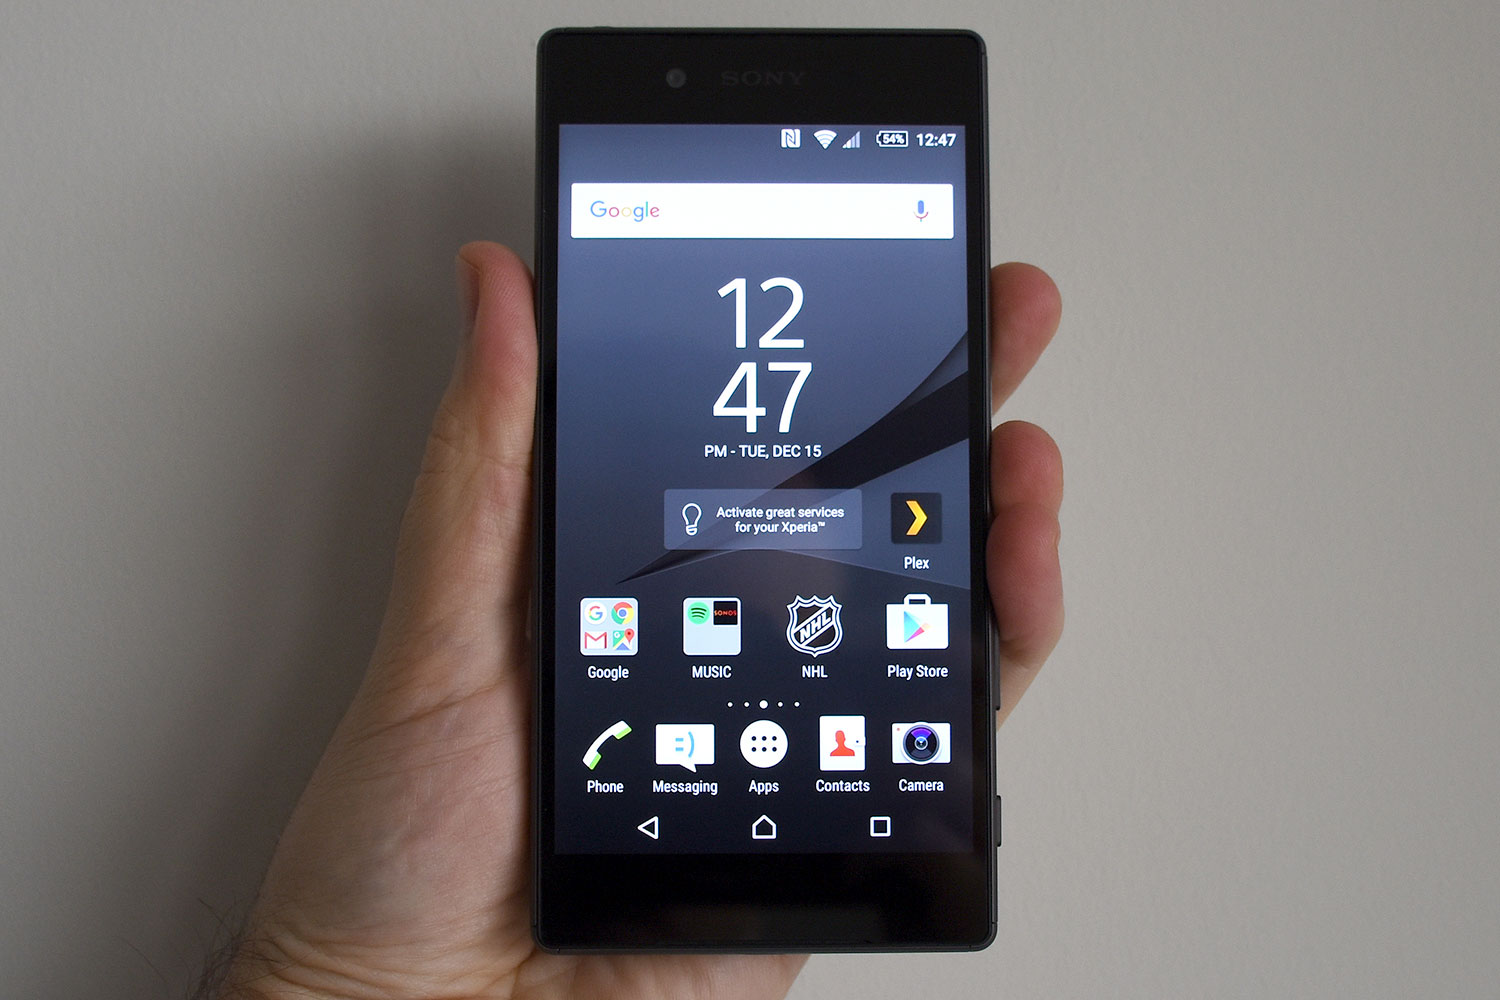 Voetzool Gedragen Perth Blackborough Sony Xperia Z5 | Full Review, Specs, Price, and More | Digital Trends